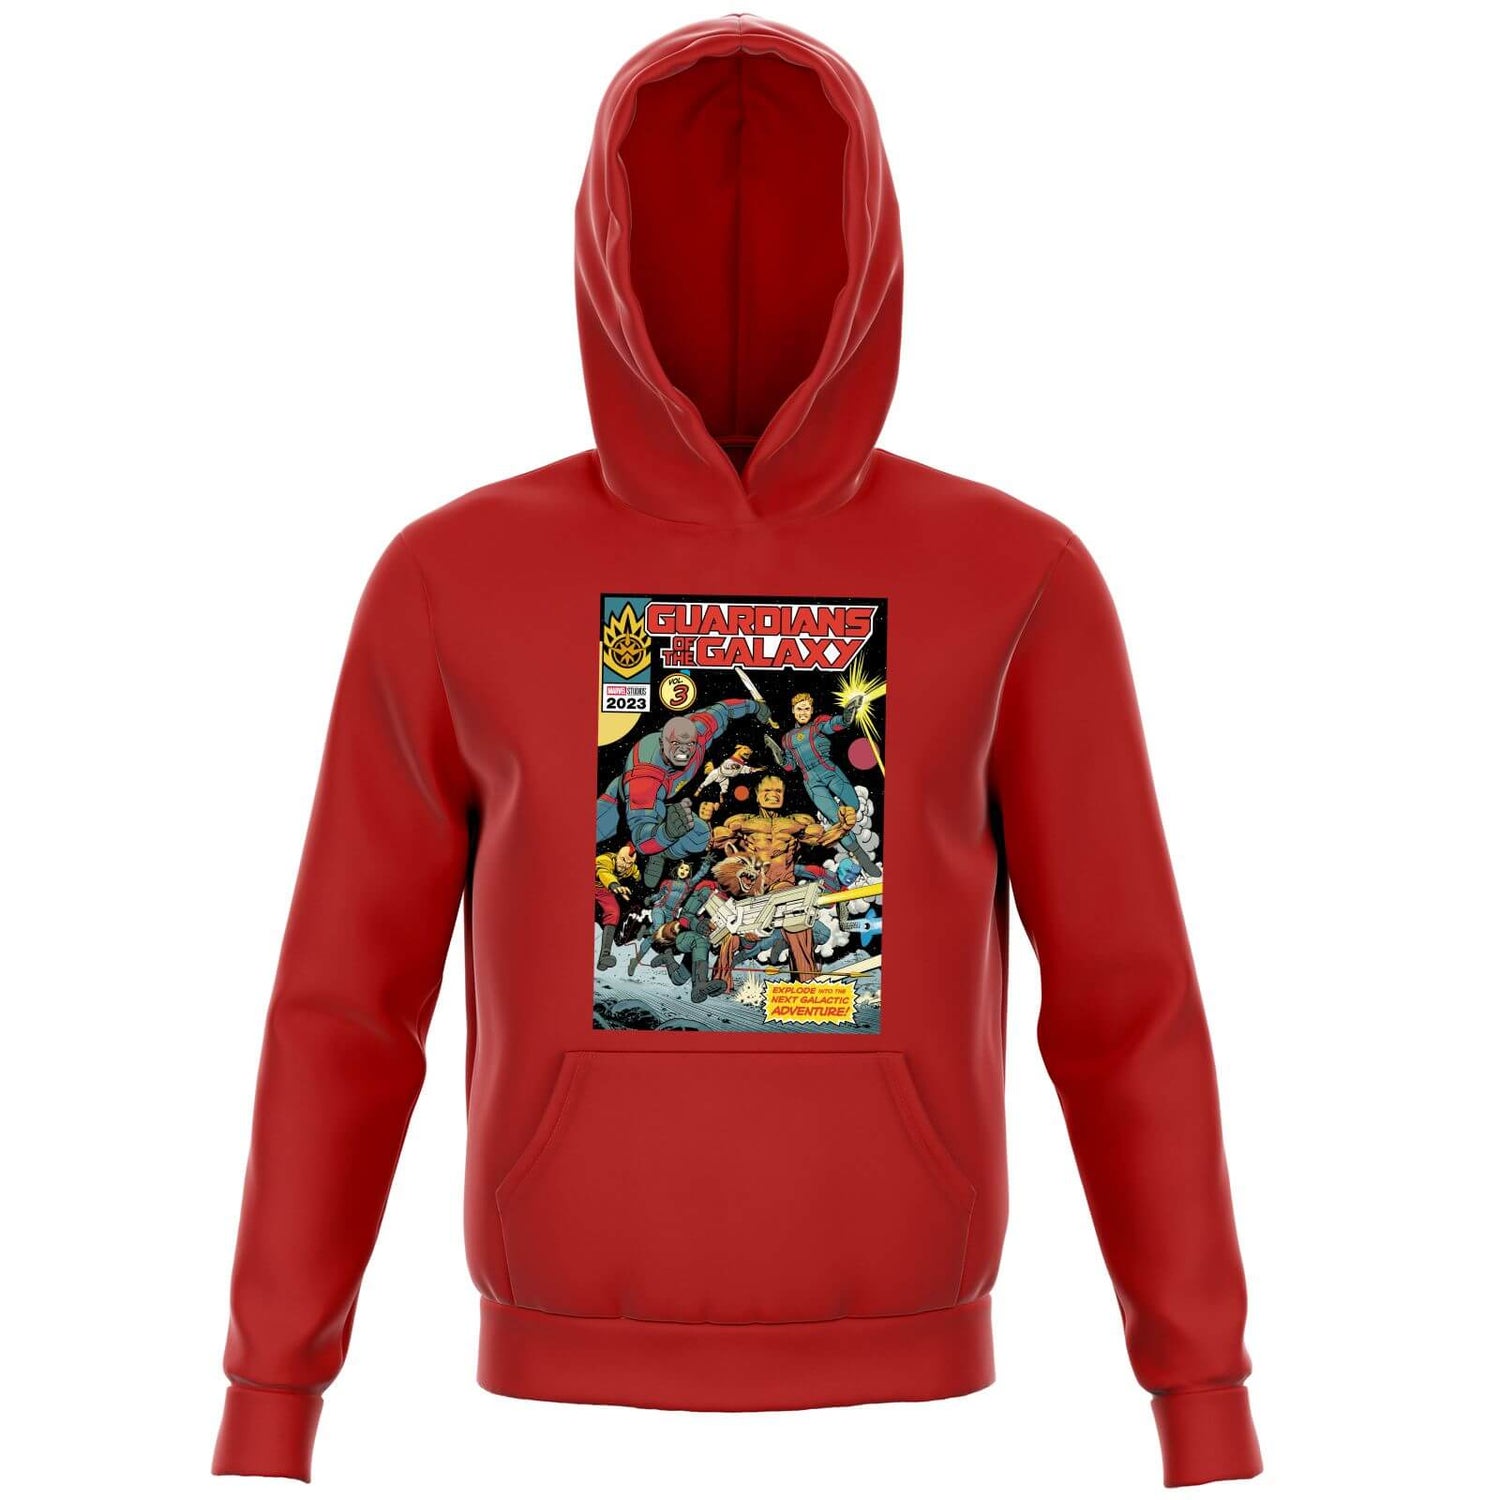 Guardians of the Galaxy The Next Galactic Adventure Kids' Hoodie - Red